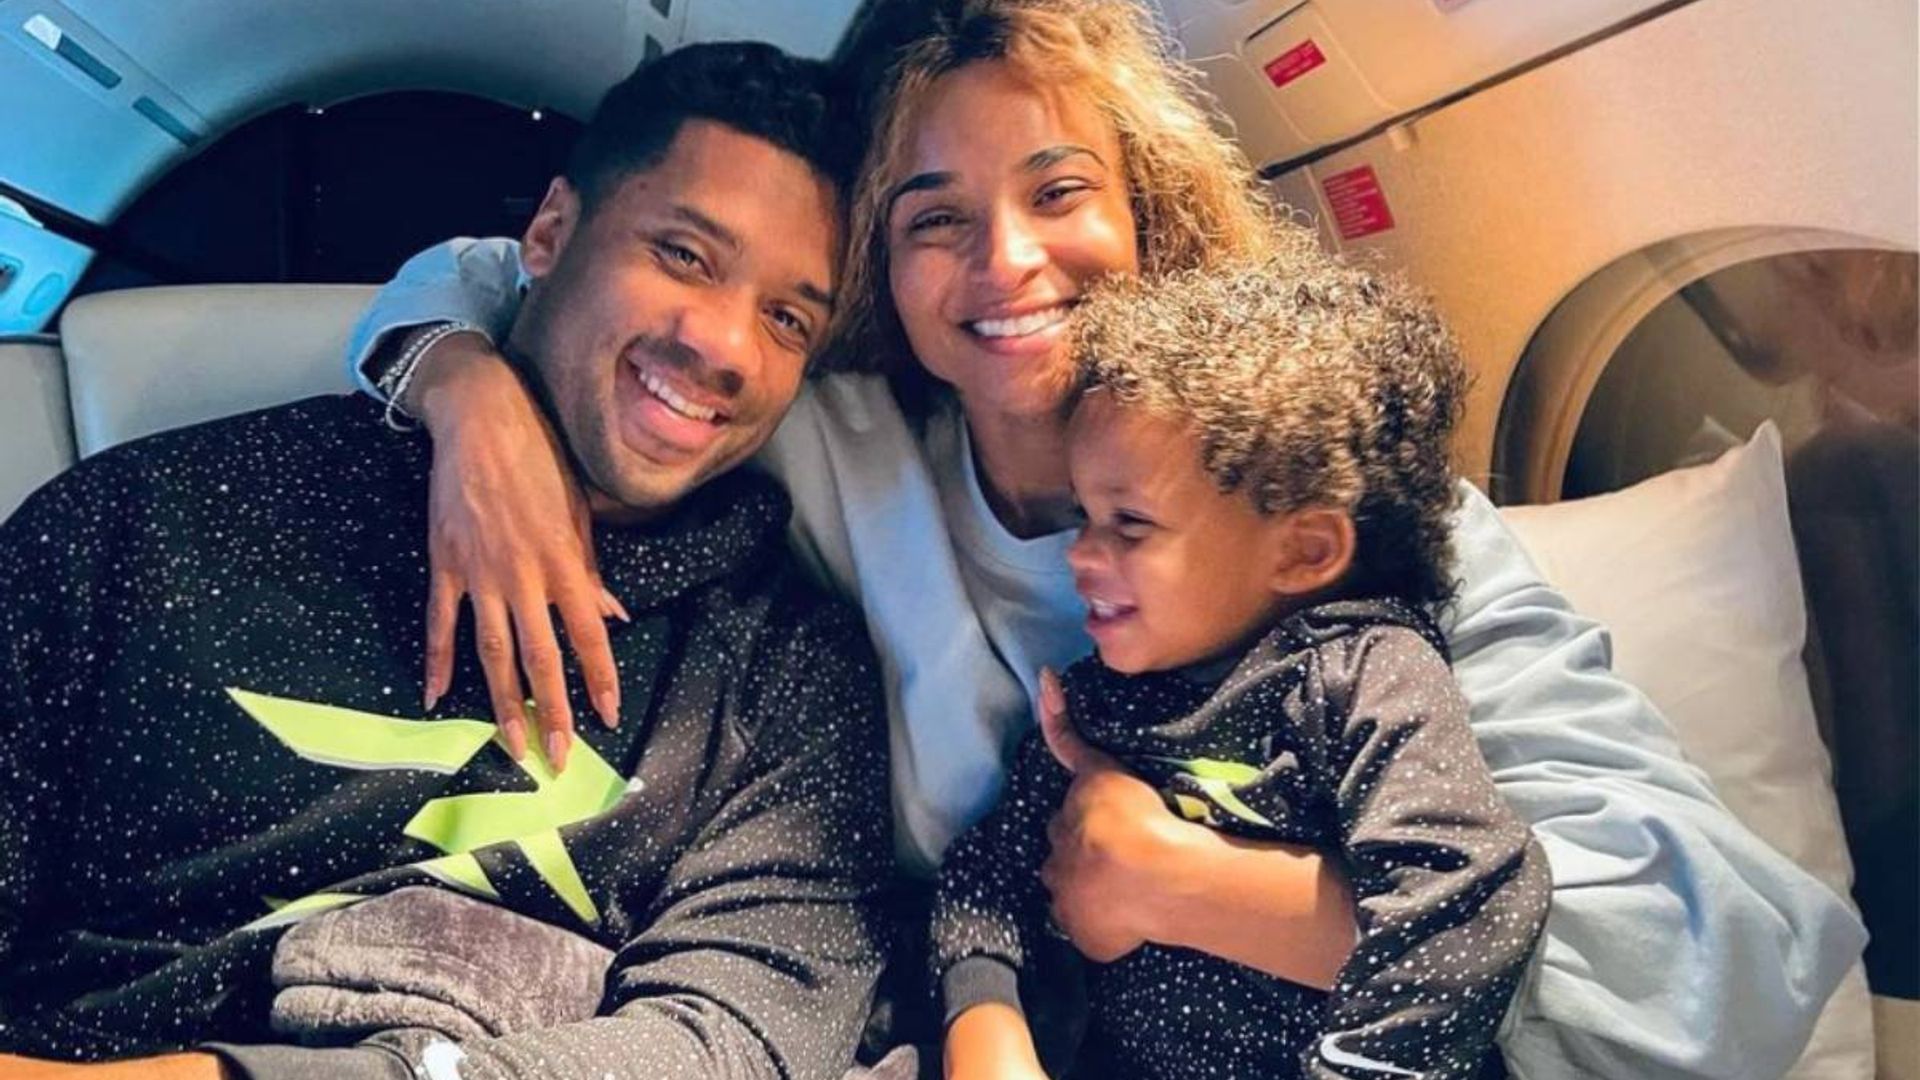 Ciara and Russell Wilson share the most heartwarming news with fans